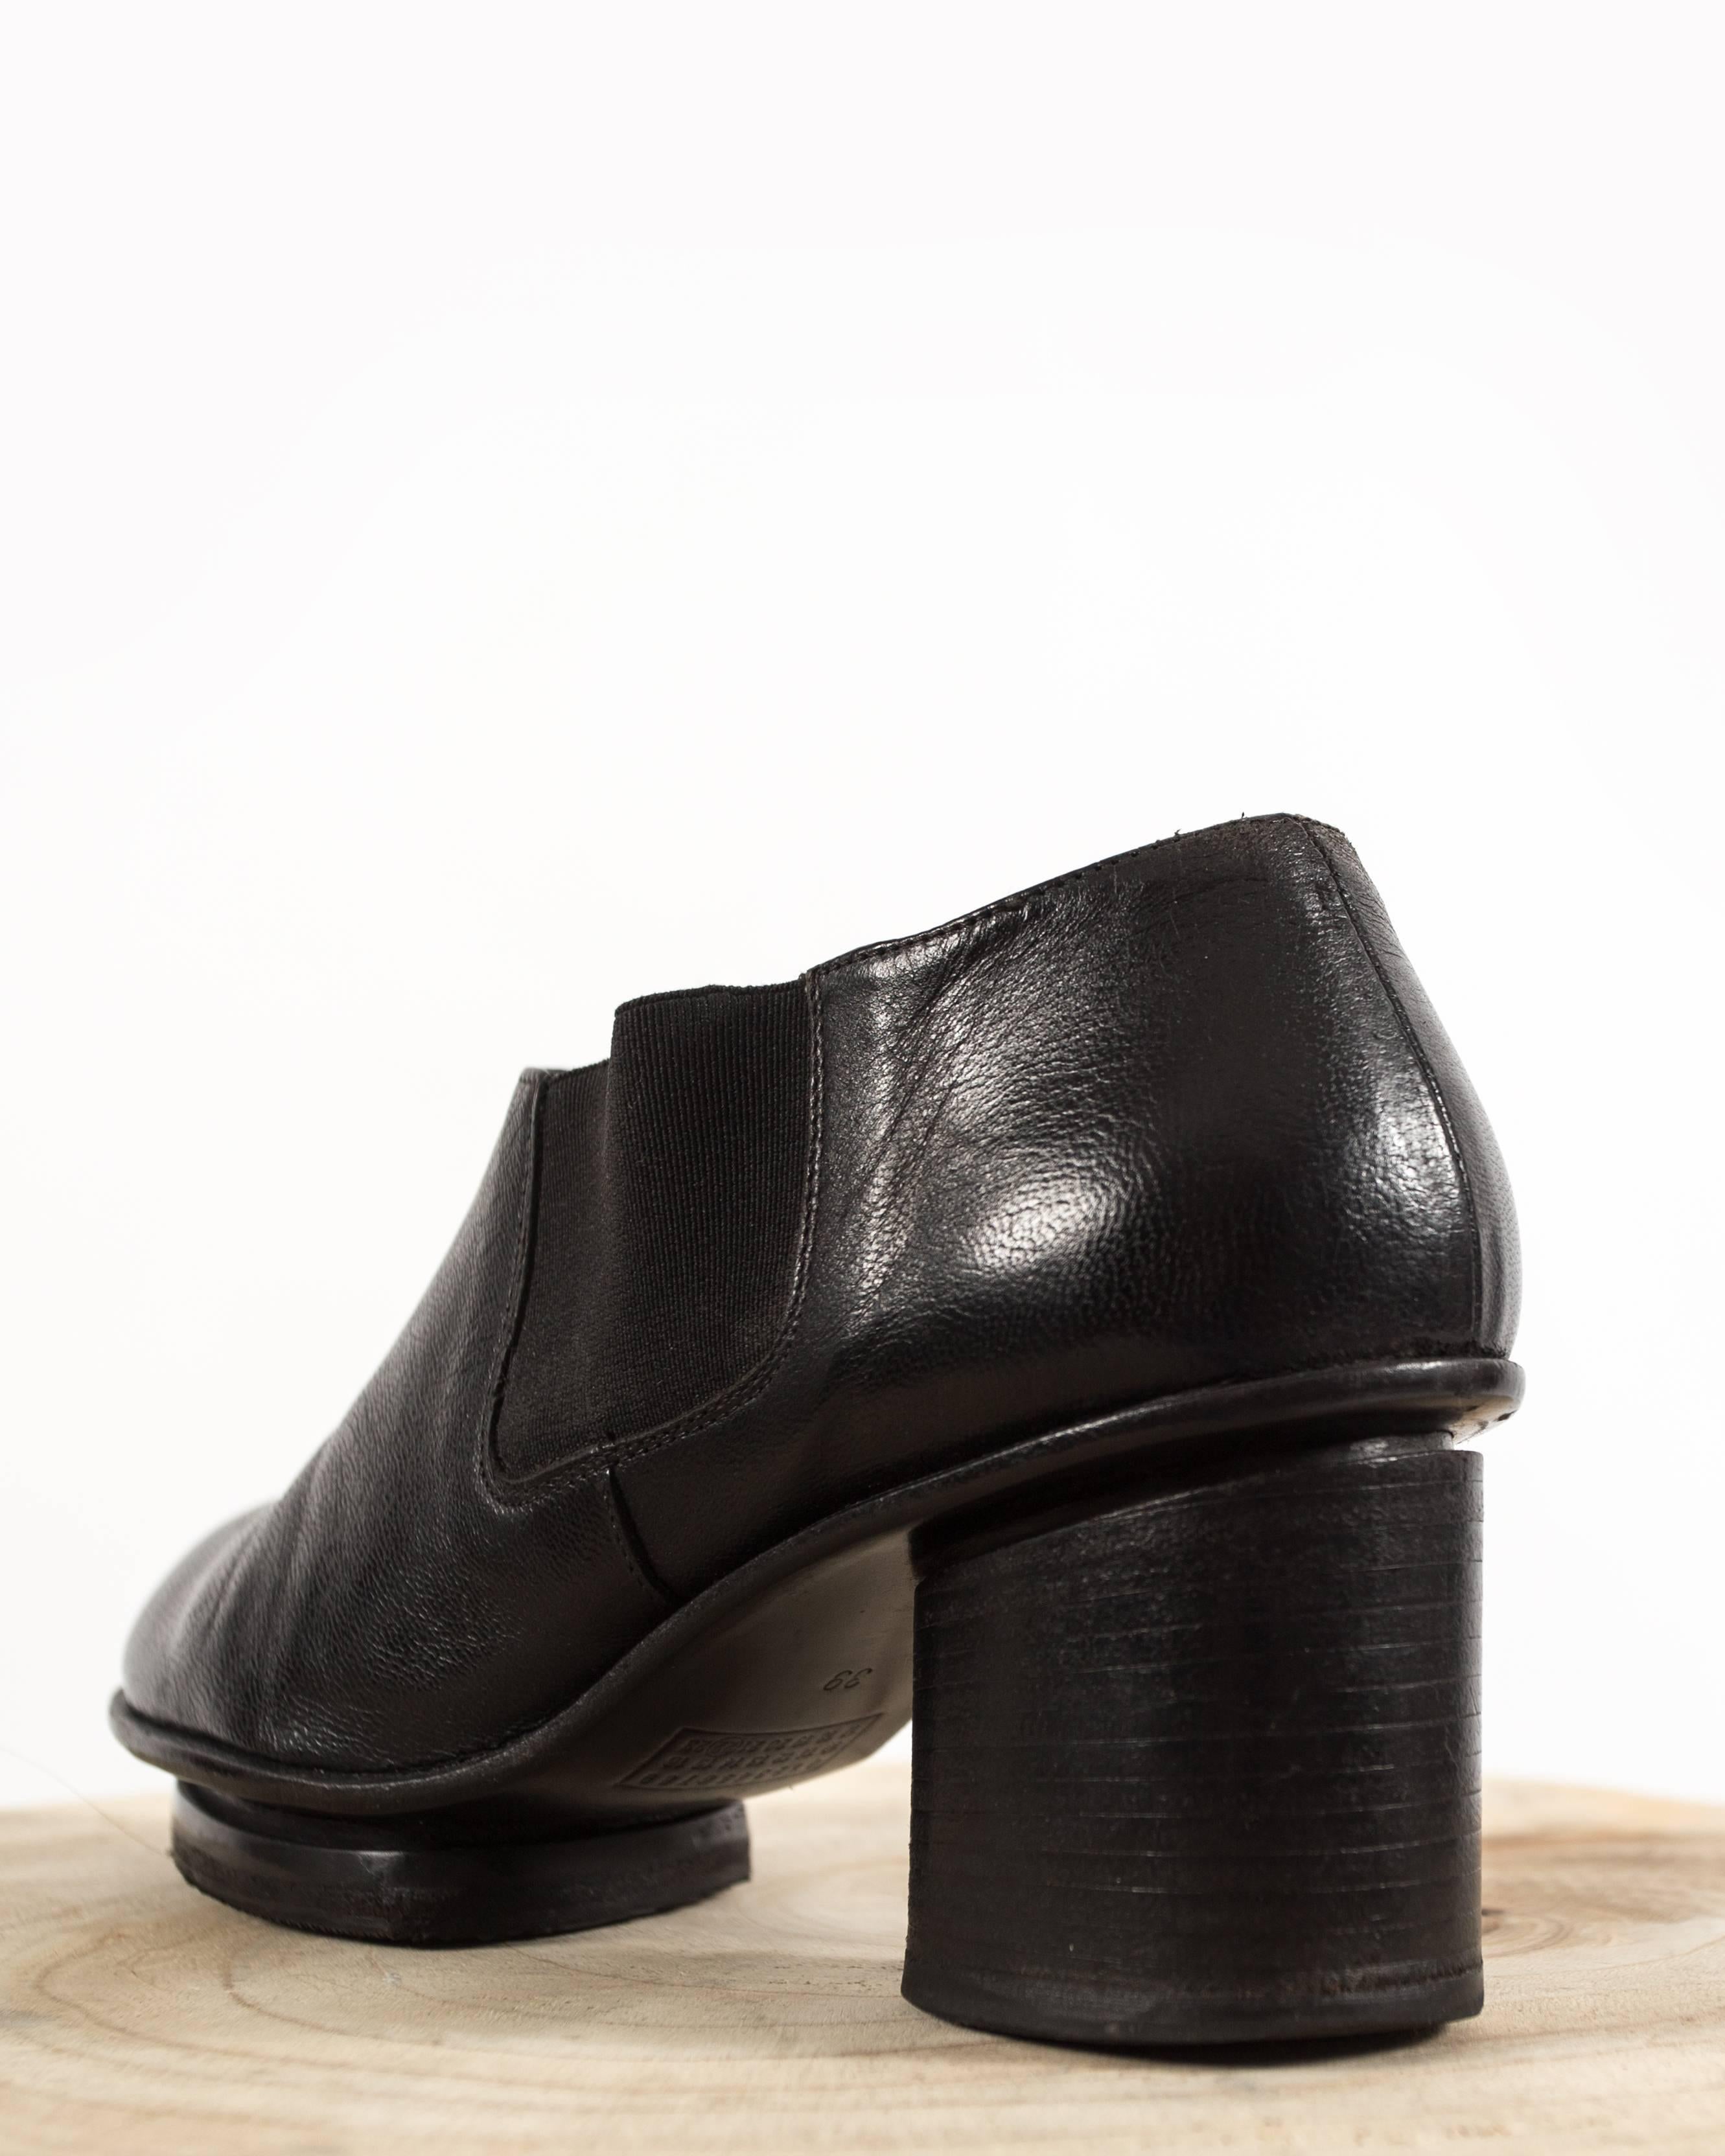 Black Martin Margiela black leather heeled pumps with sock boots, fw 1999 For Sale